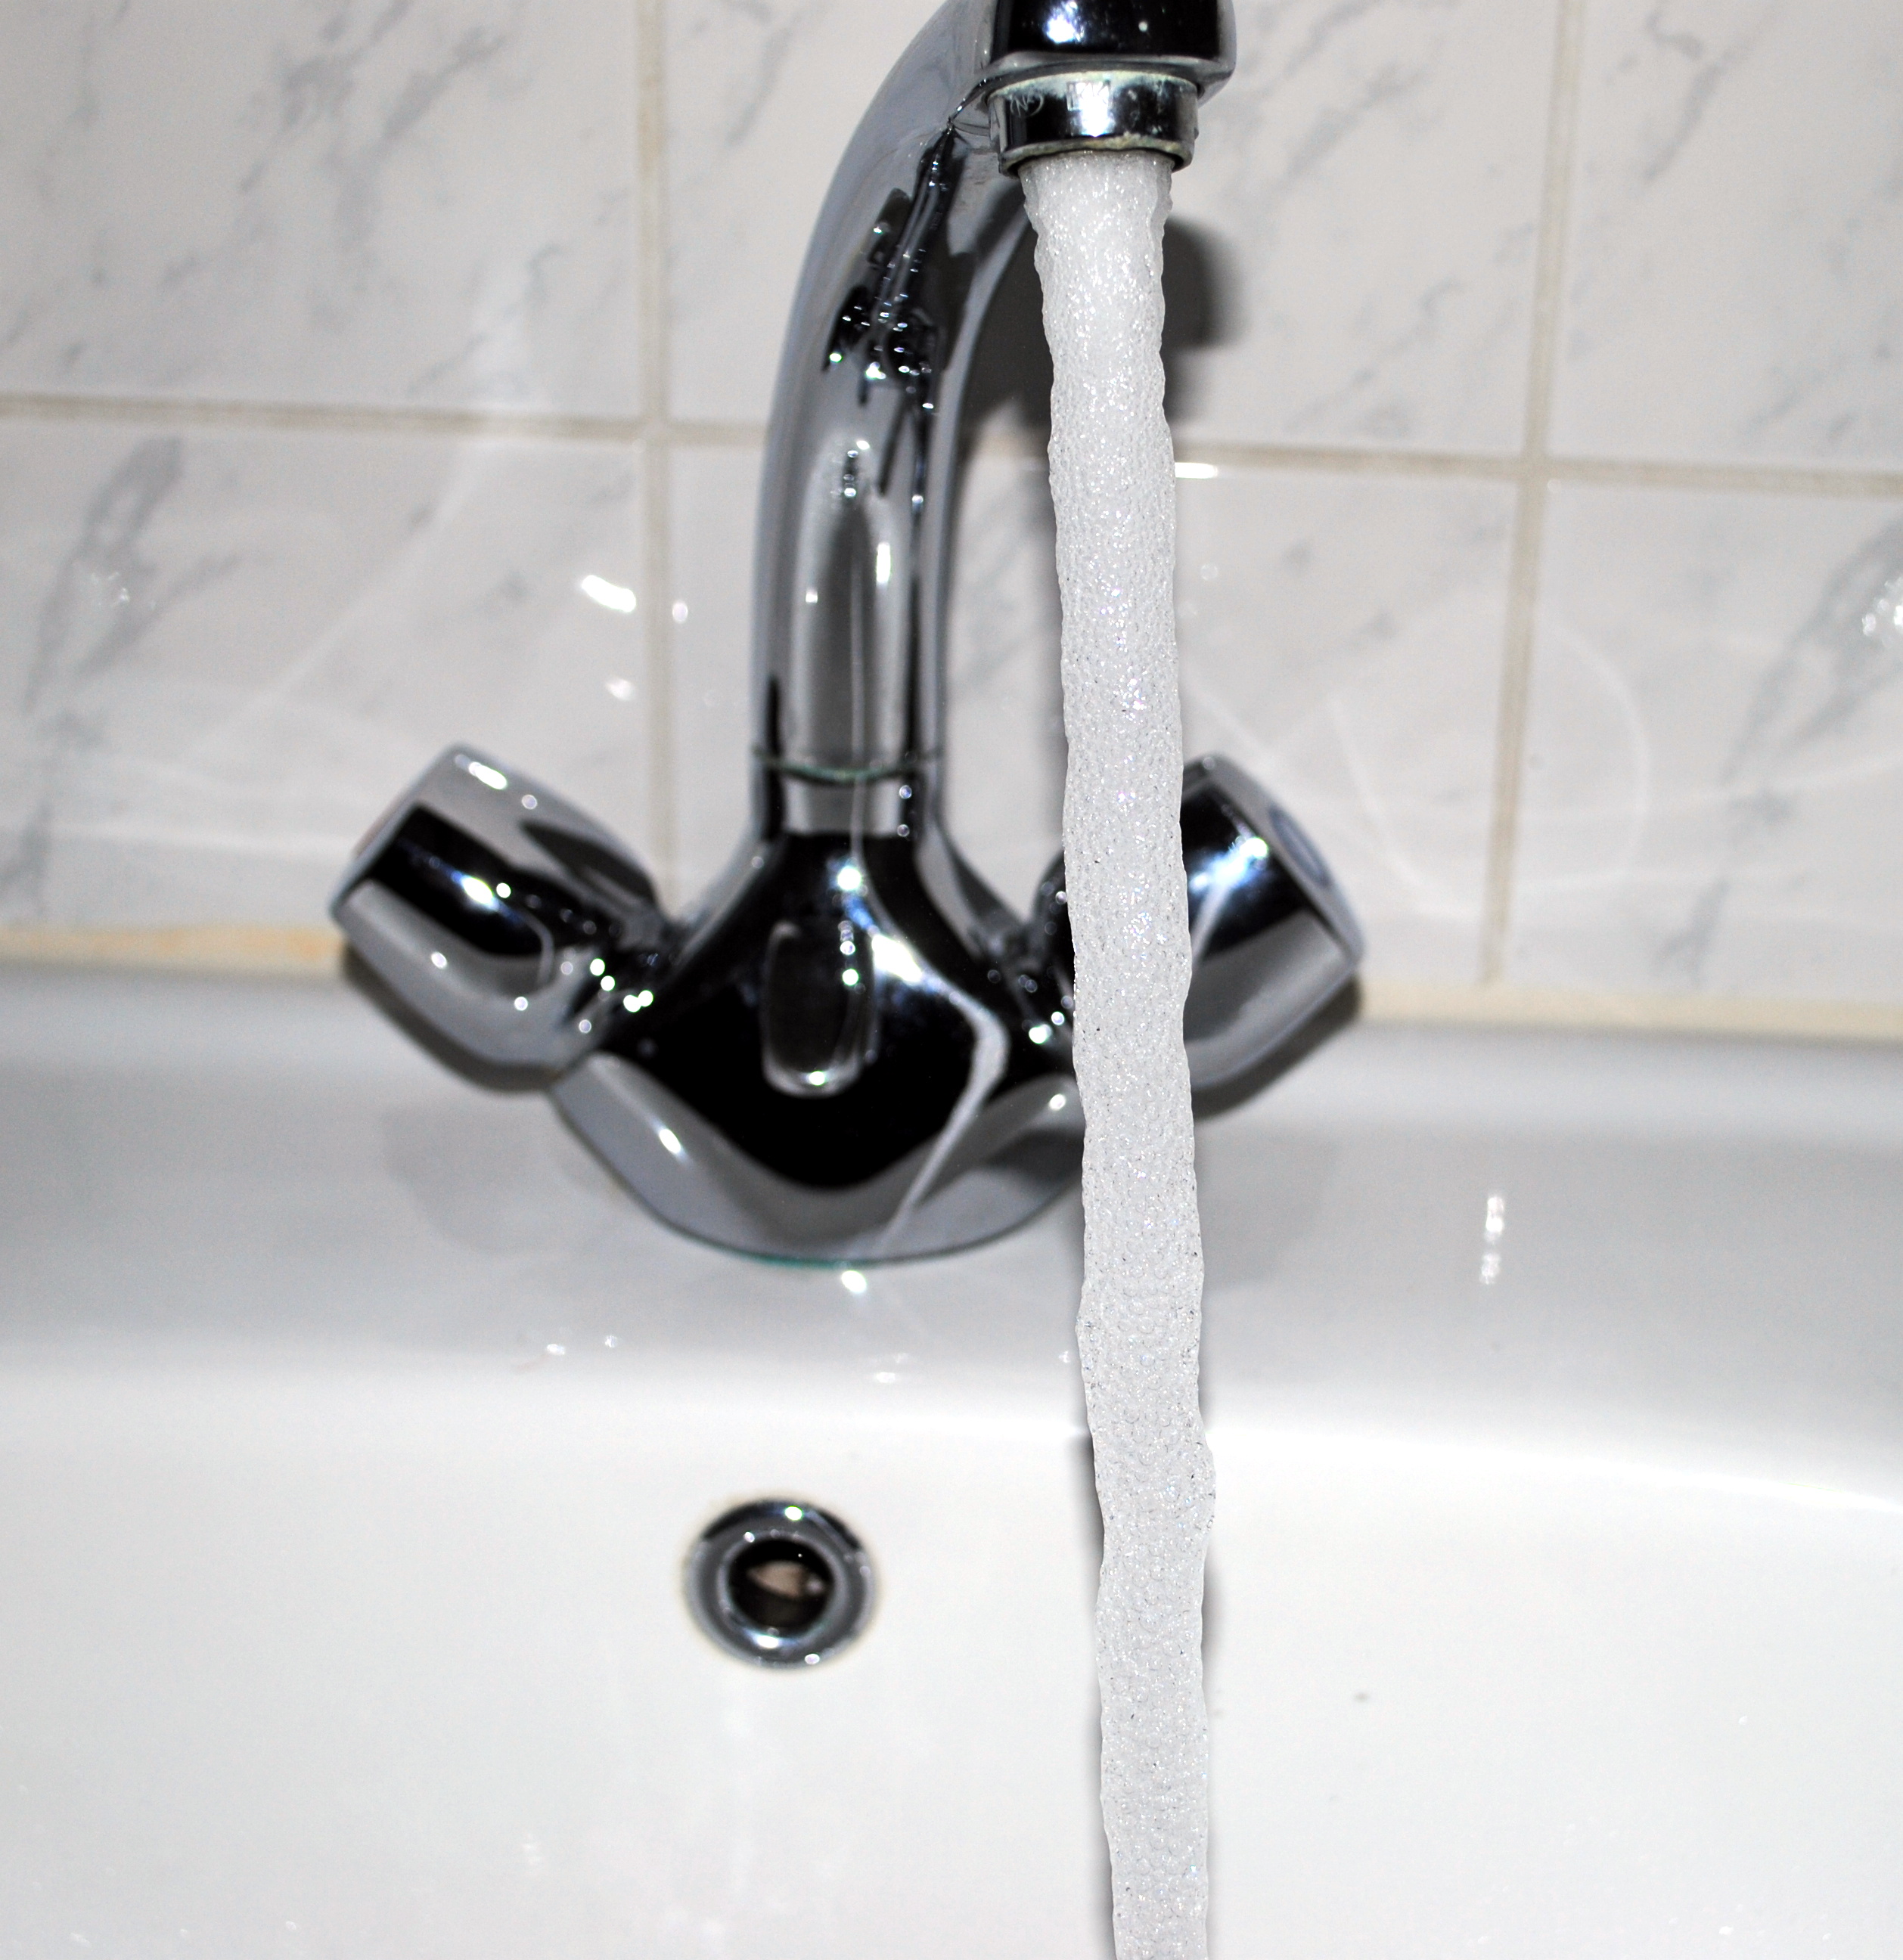 check whether water is coming from taps or not